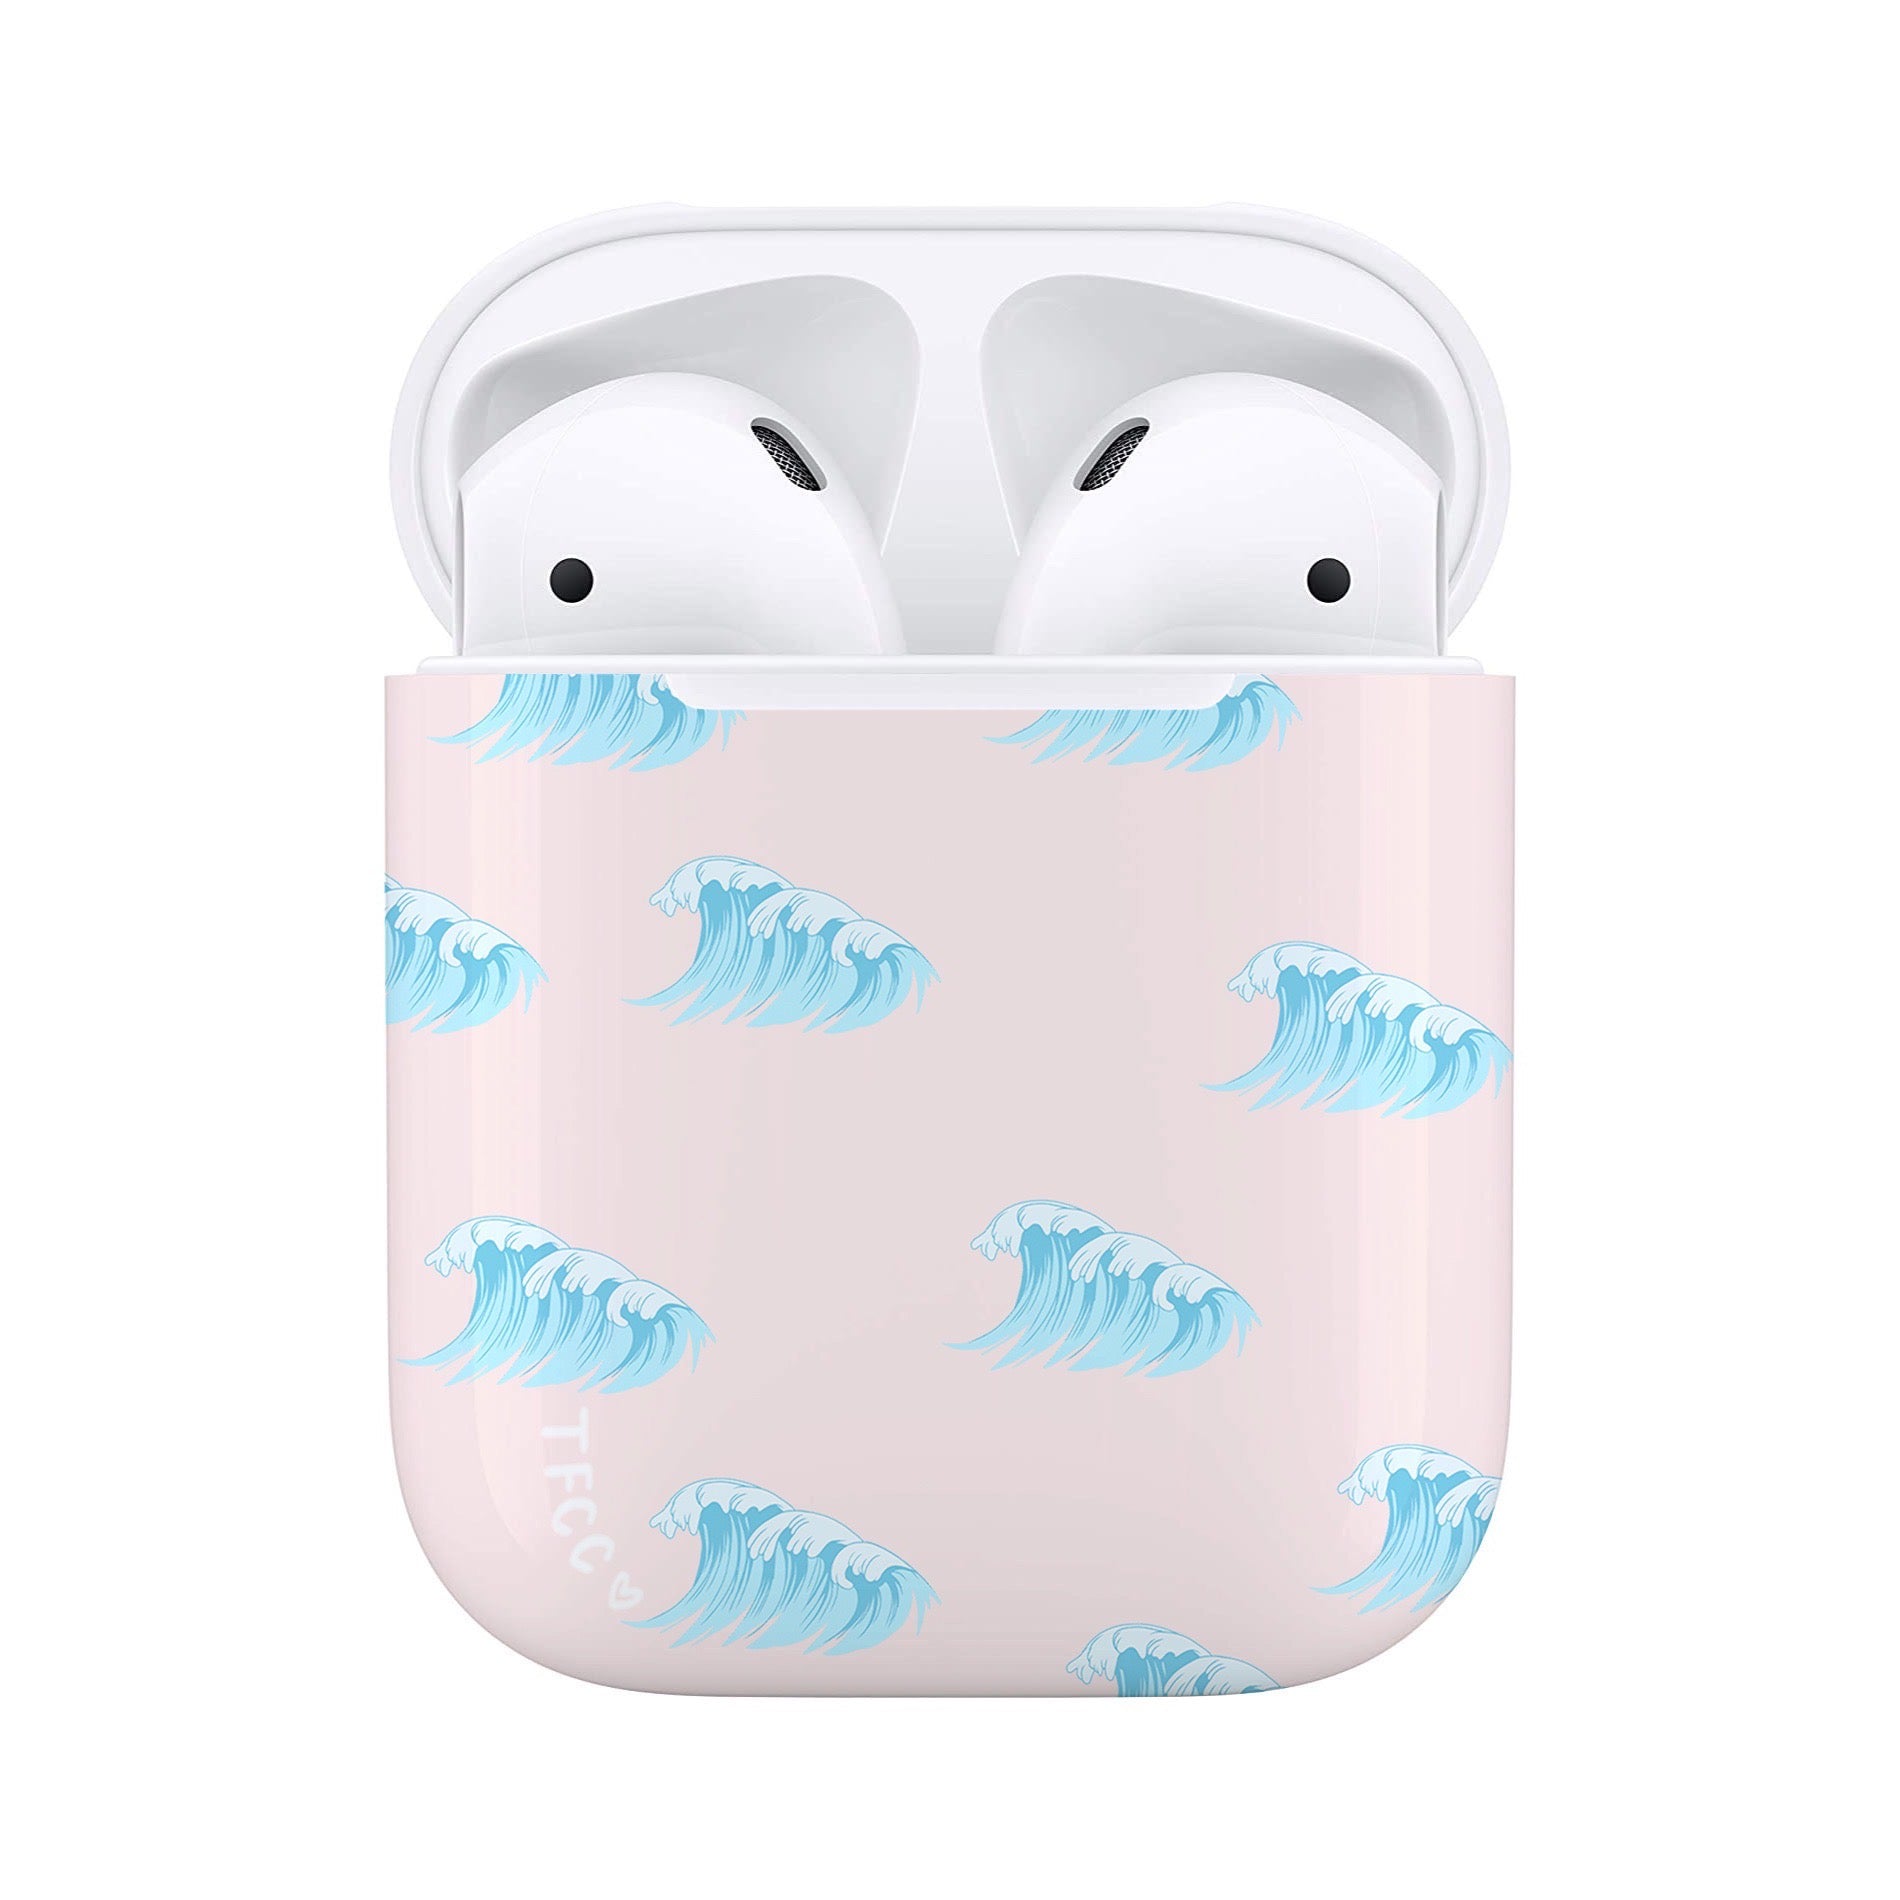 AirPods Cases - thefonecasecompany